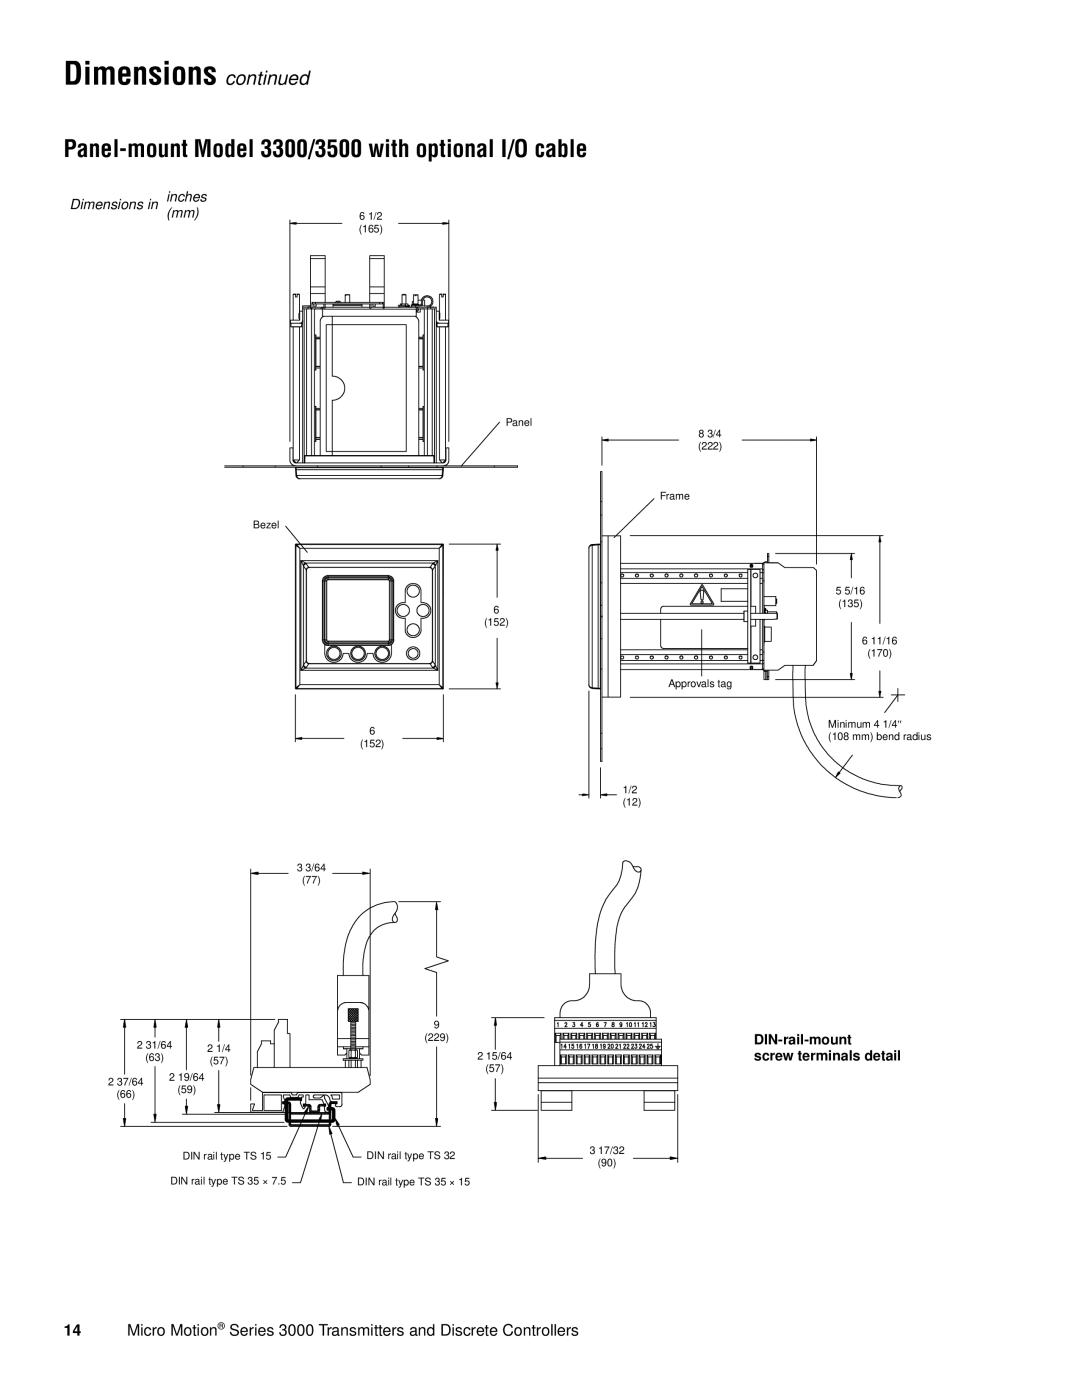 Emerson Series 3000 manual Dimensions continued, Dimensions in, inches, DIN-rail-mount screw terminals detail 